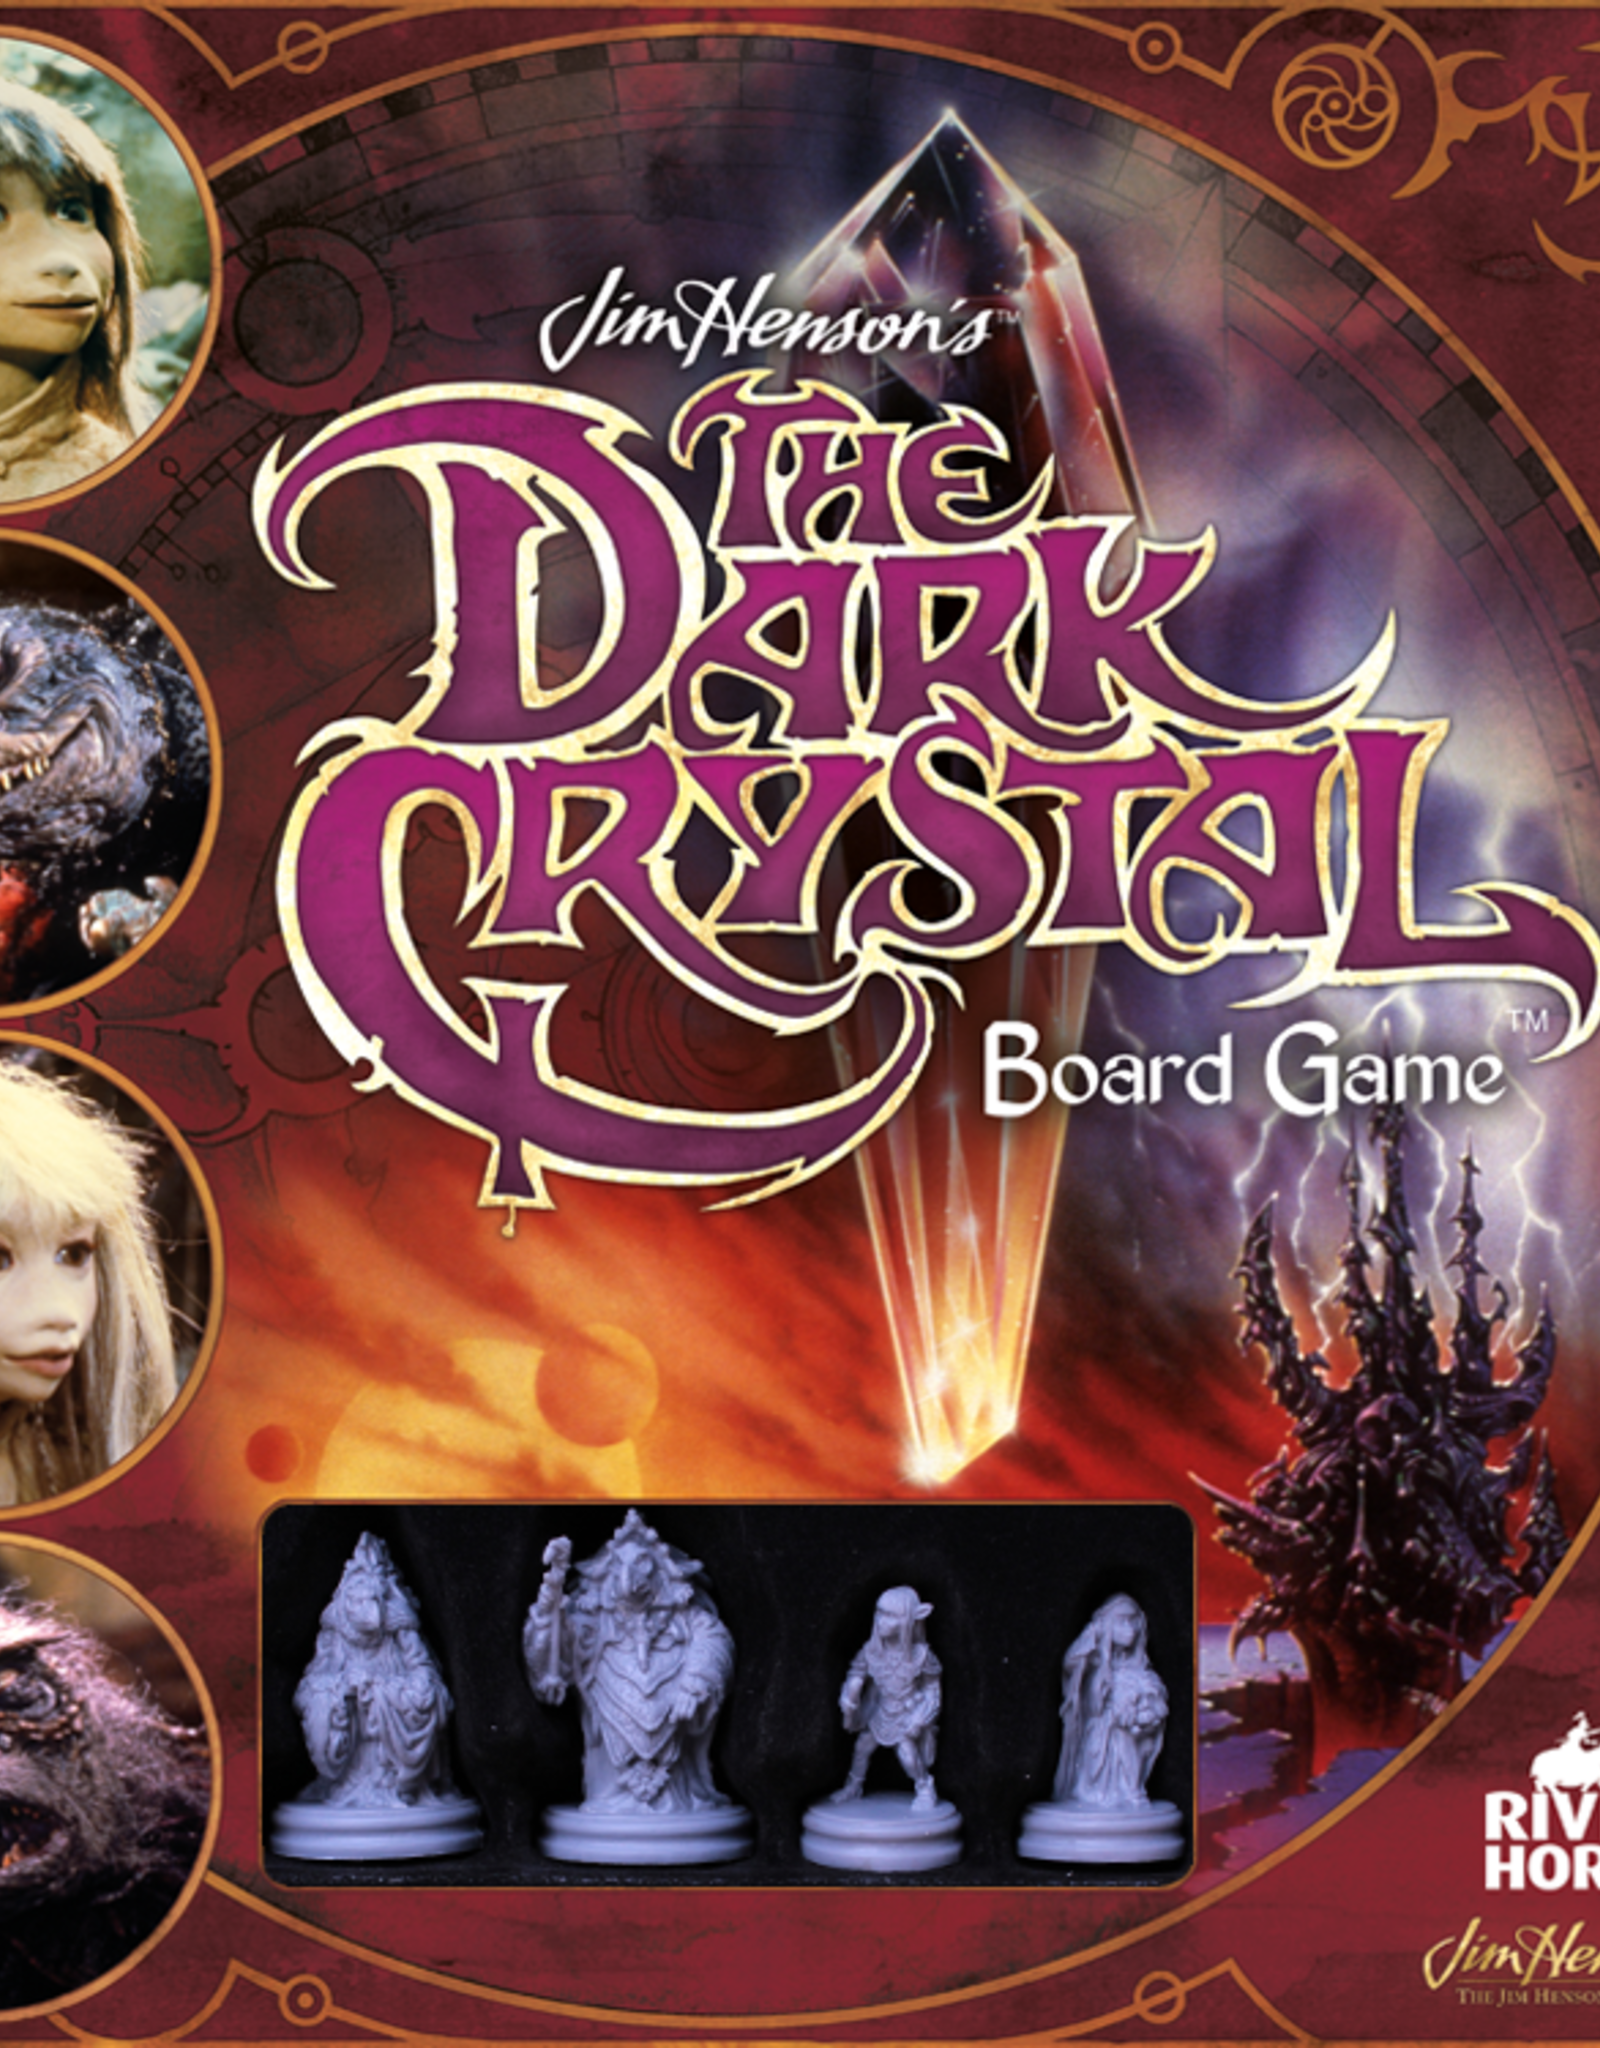 River Horse The Dark Crystal Board Game